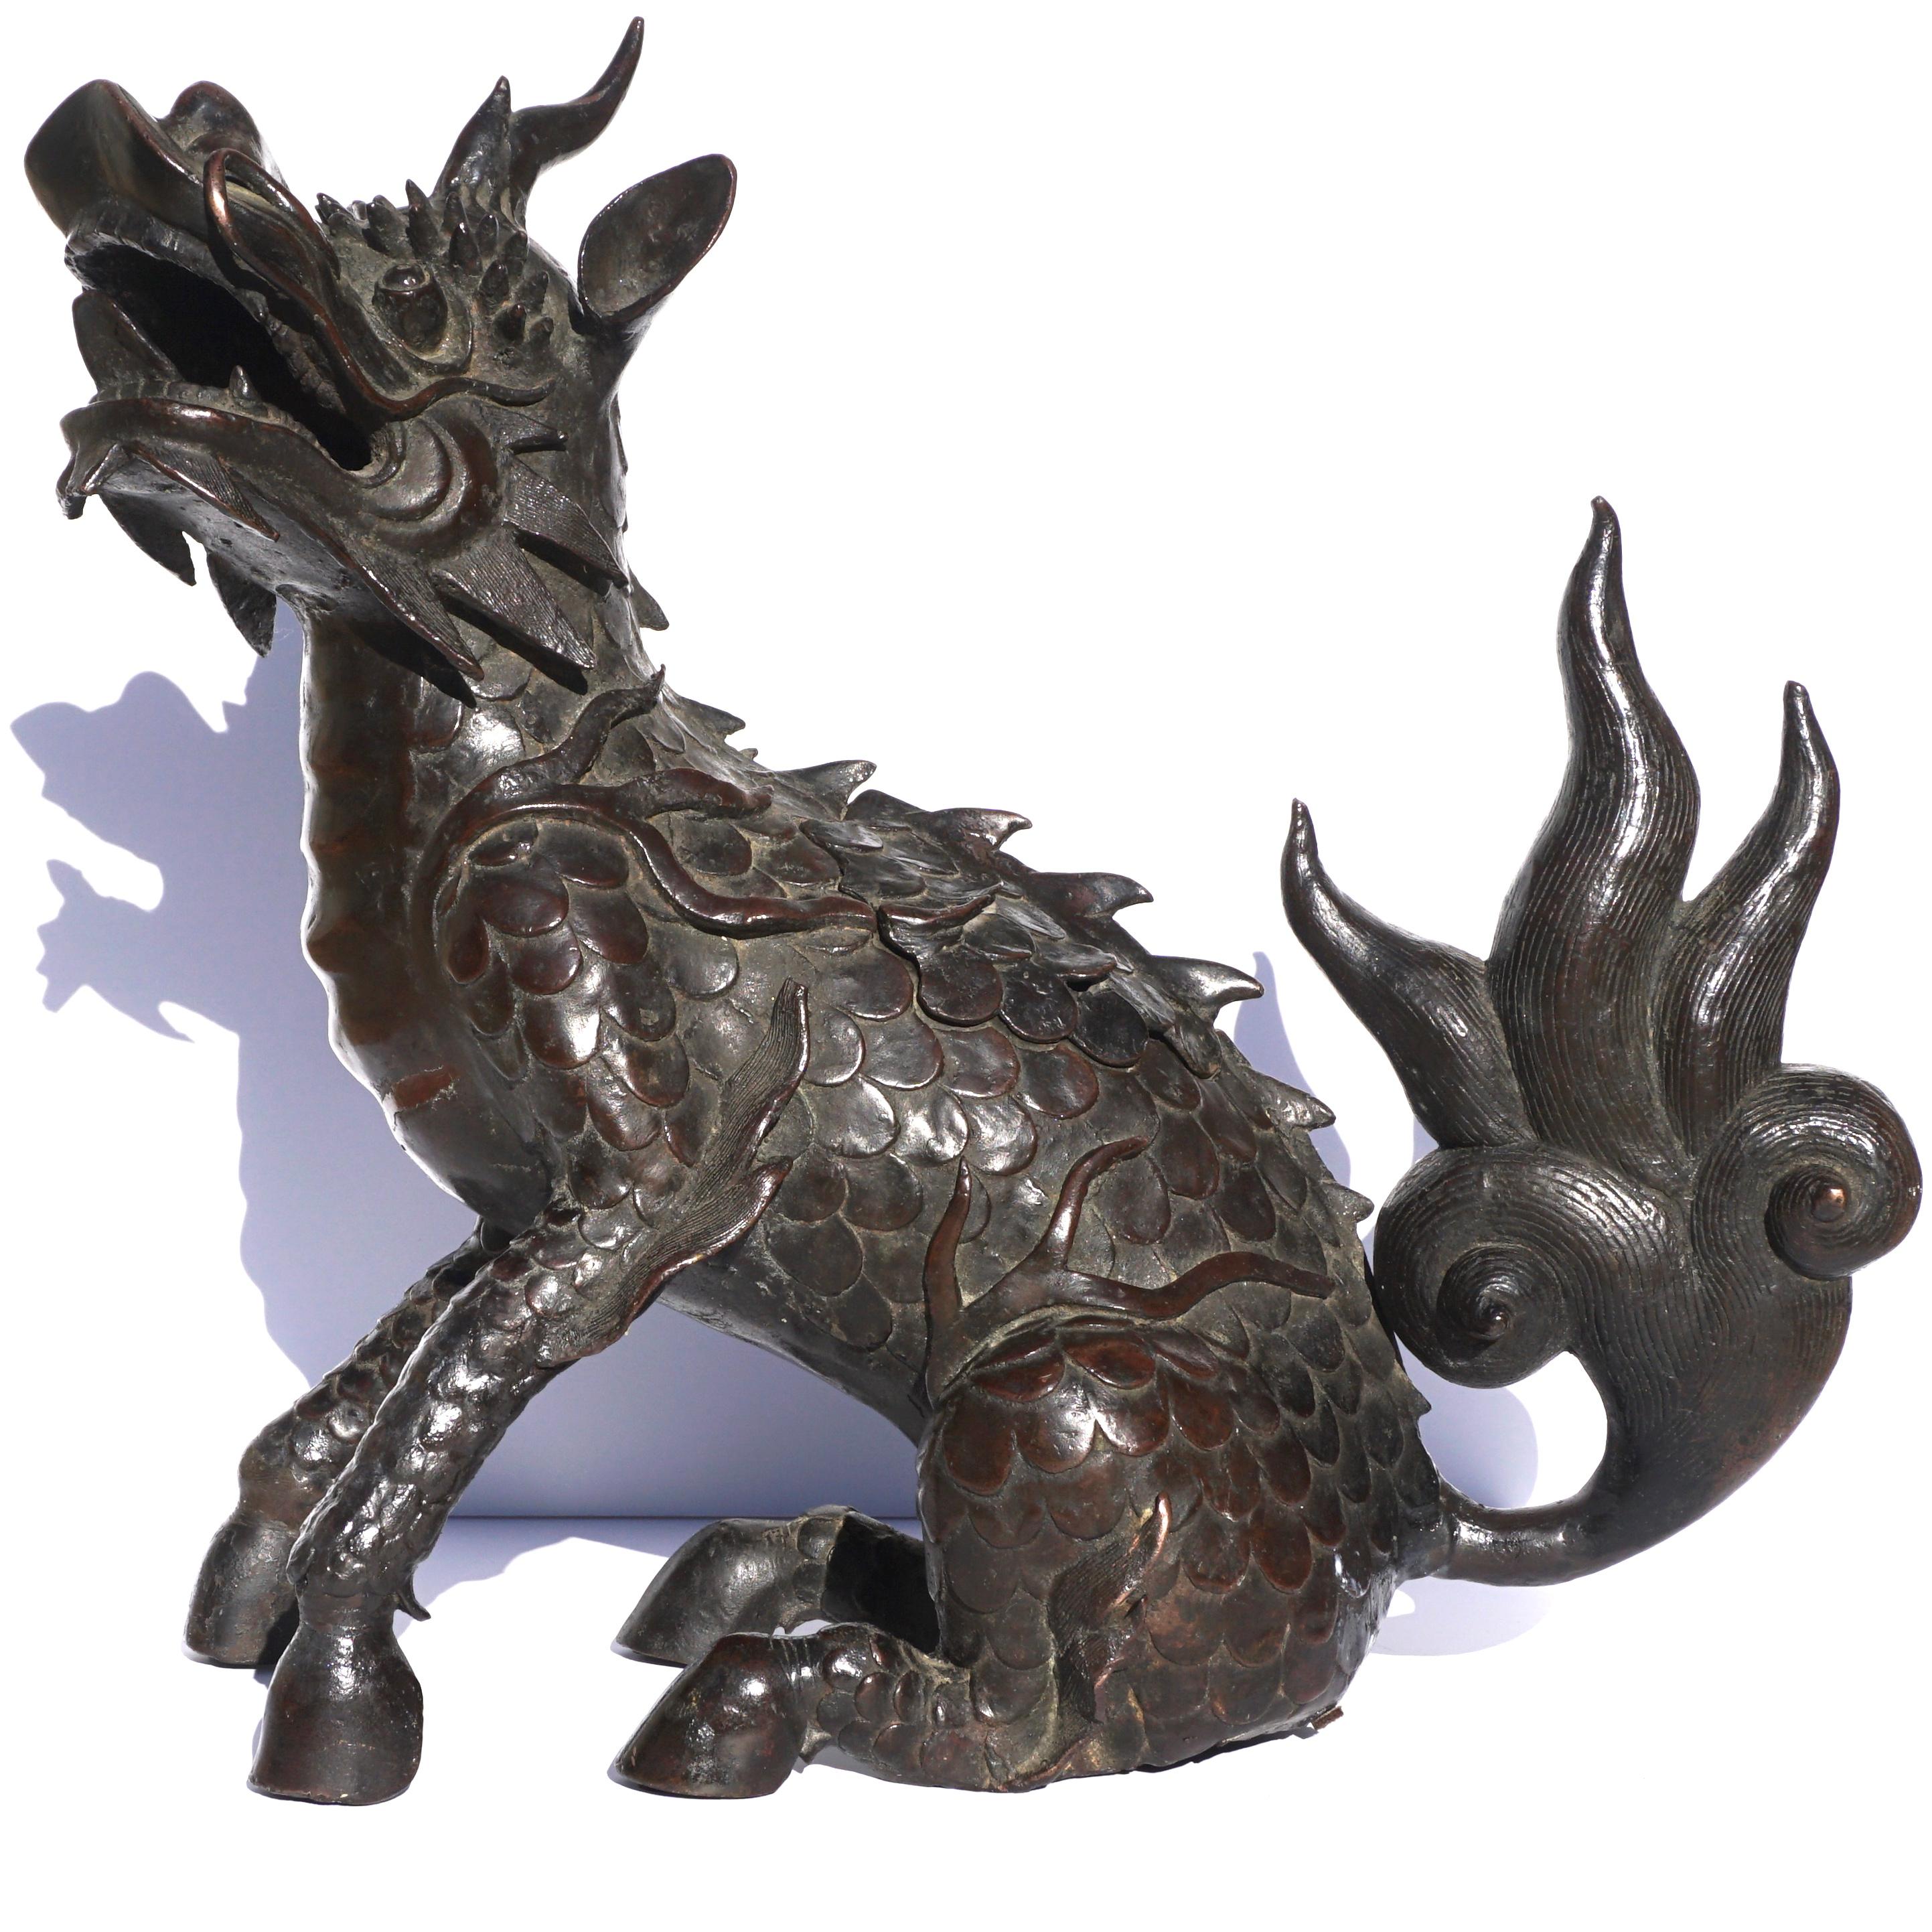 A large Chinese Ming bronze kyrin shape incense burner. Beautiful and decorative period Ming dynasty cast bronze of a scaled foo dog or mythical beast with horn, whiskers and teeth. The feet are hooves, its dragon head with a single horn and mouth